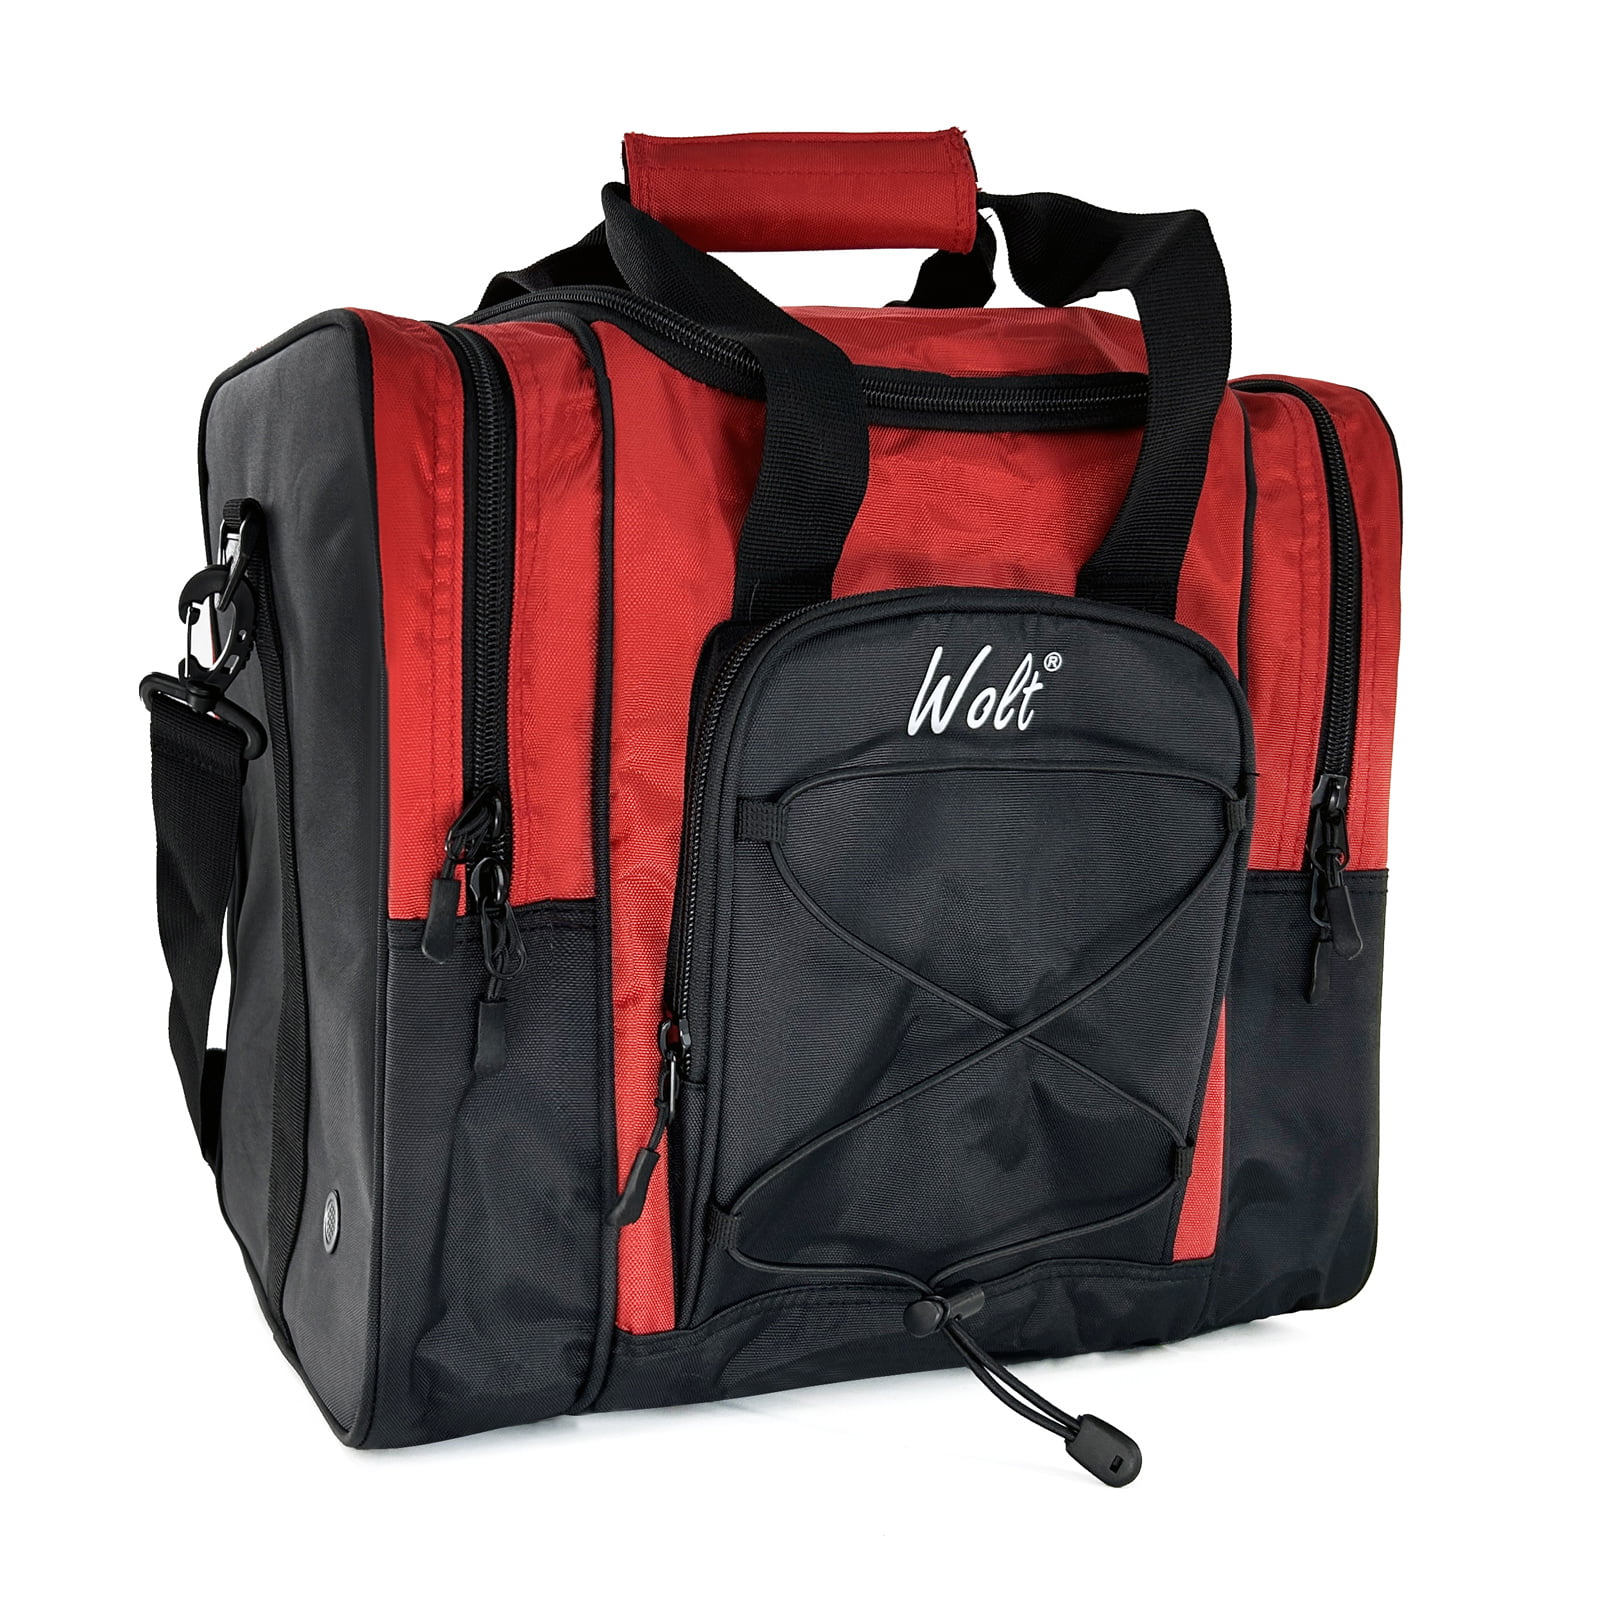 Wolt Bowling Ball Bag for Single Ball - Bowling Ball Tote Bag with